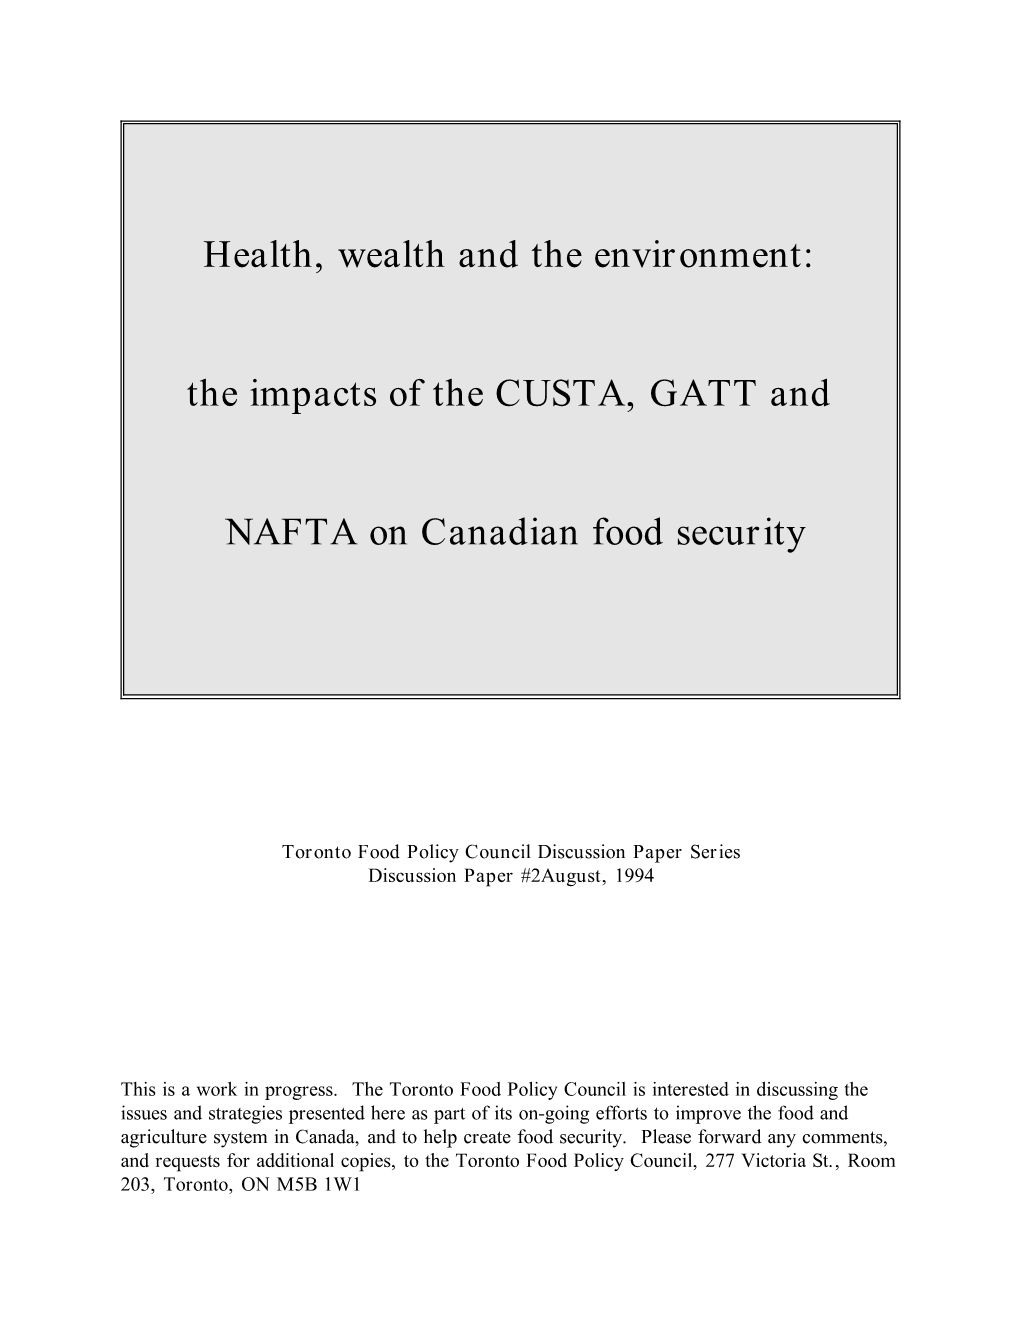 Health, Wealth and the Environment: the Impacts of the CUSTA, GATT